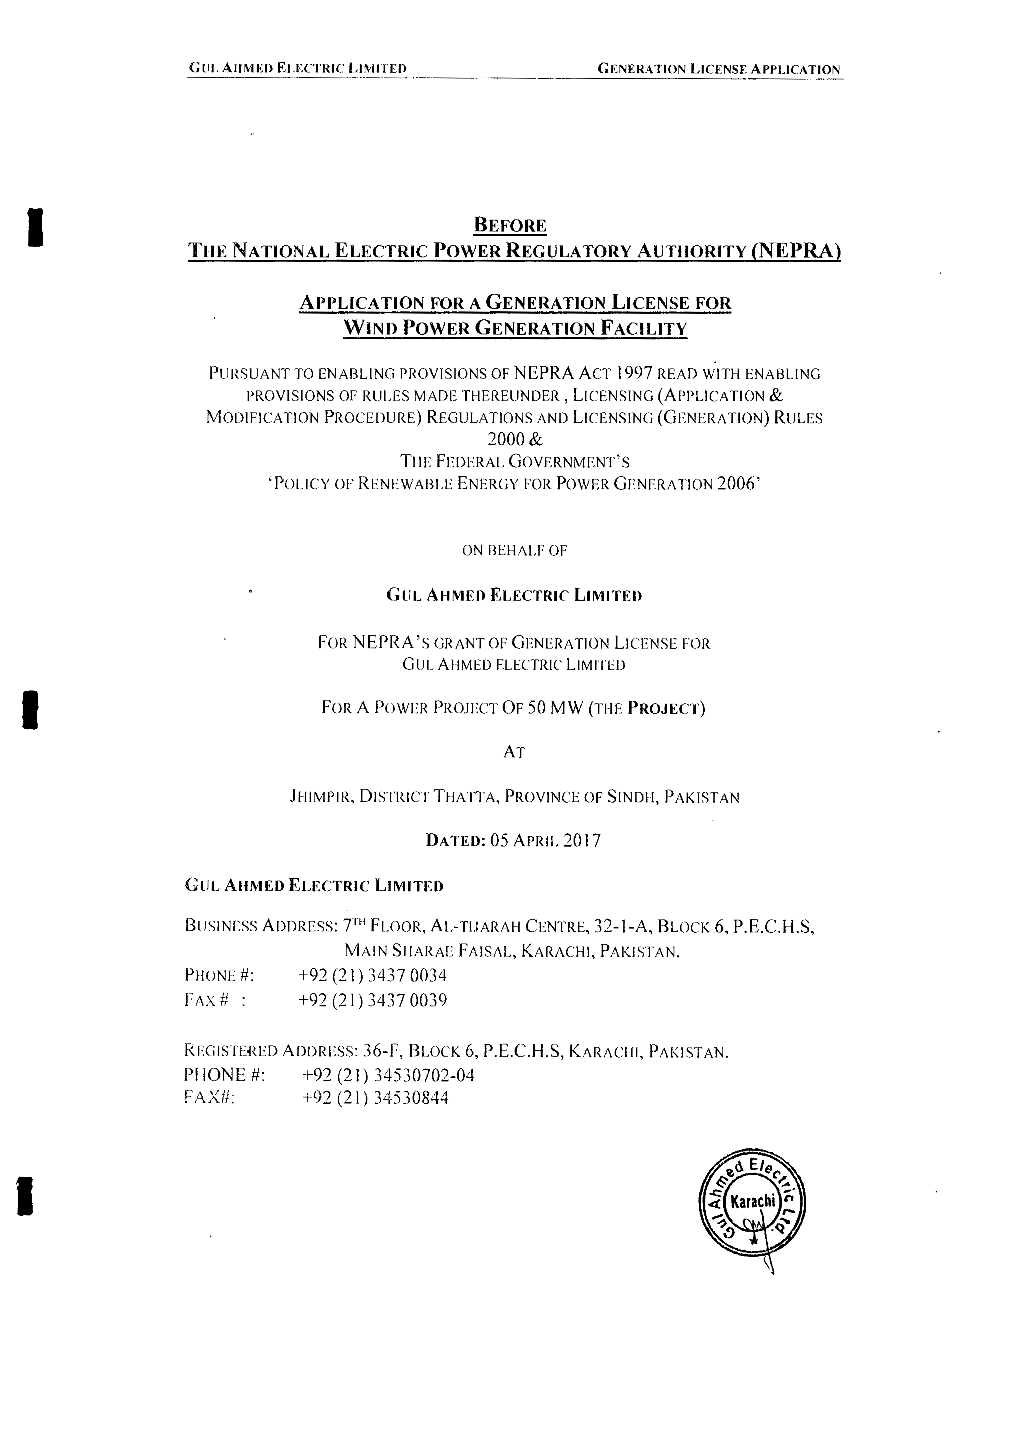 Generation License Application of Gul Ahmed Electric.Pdf